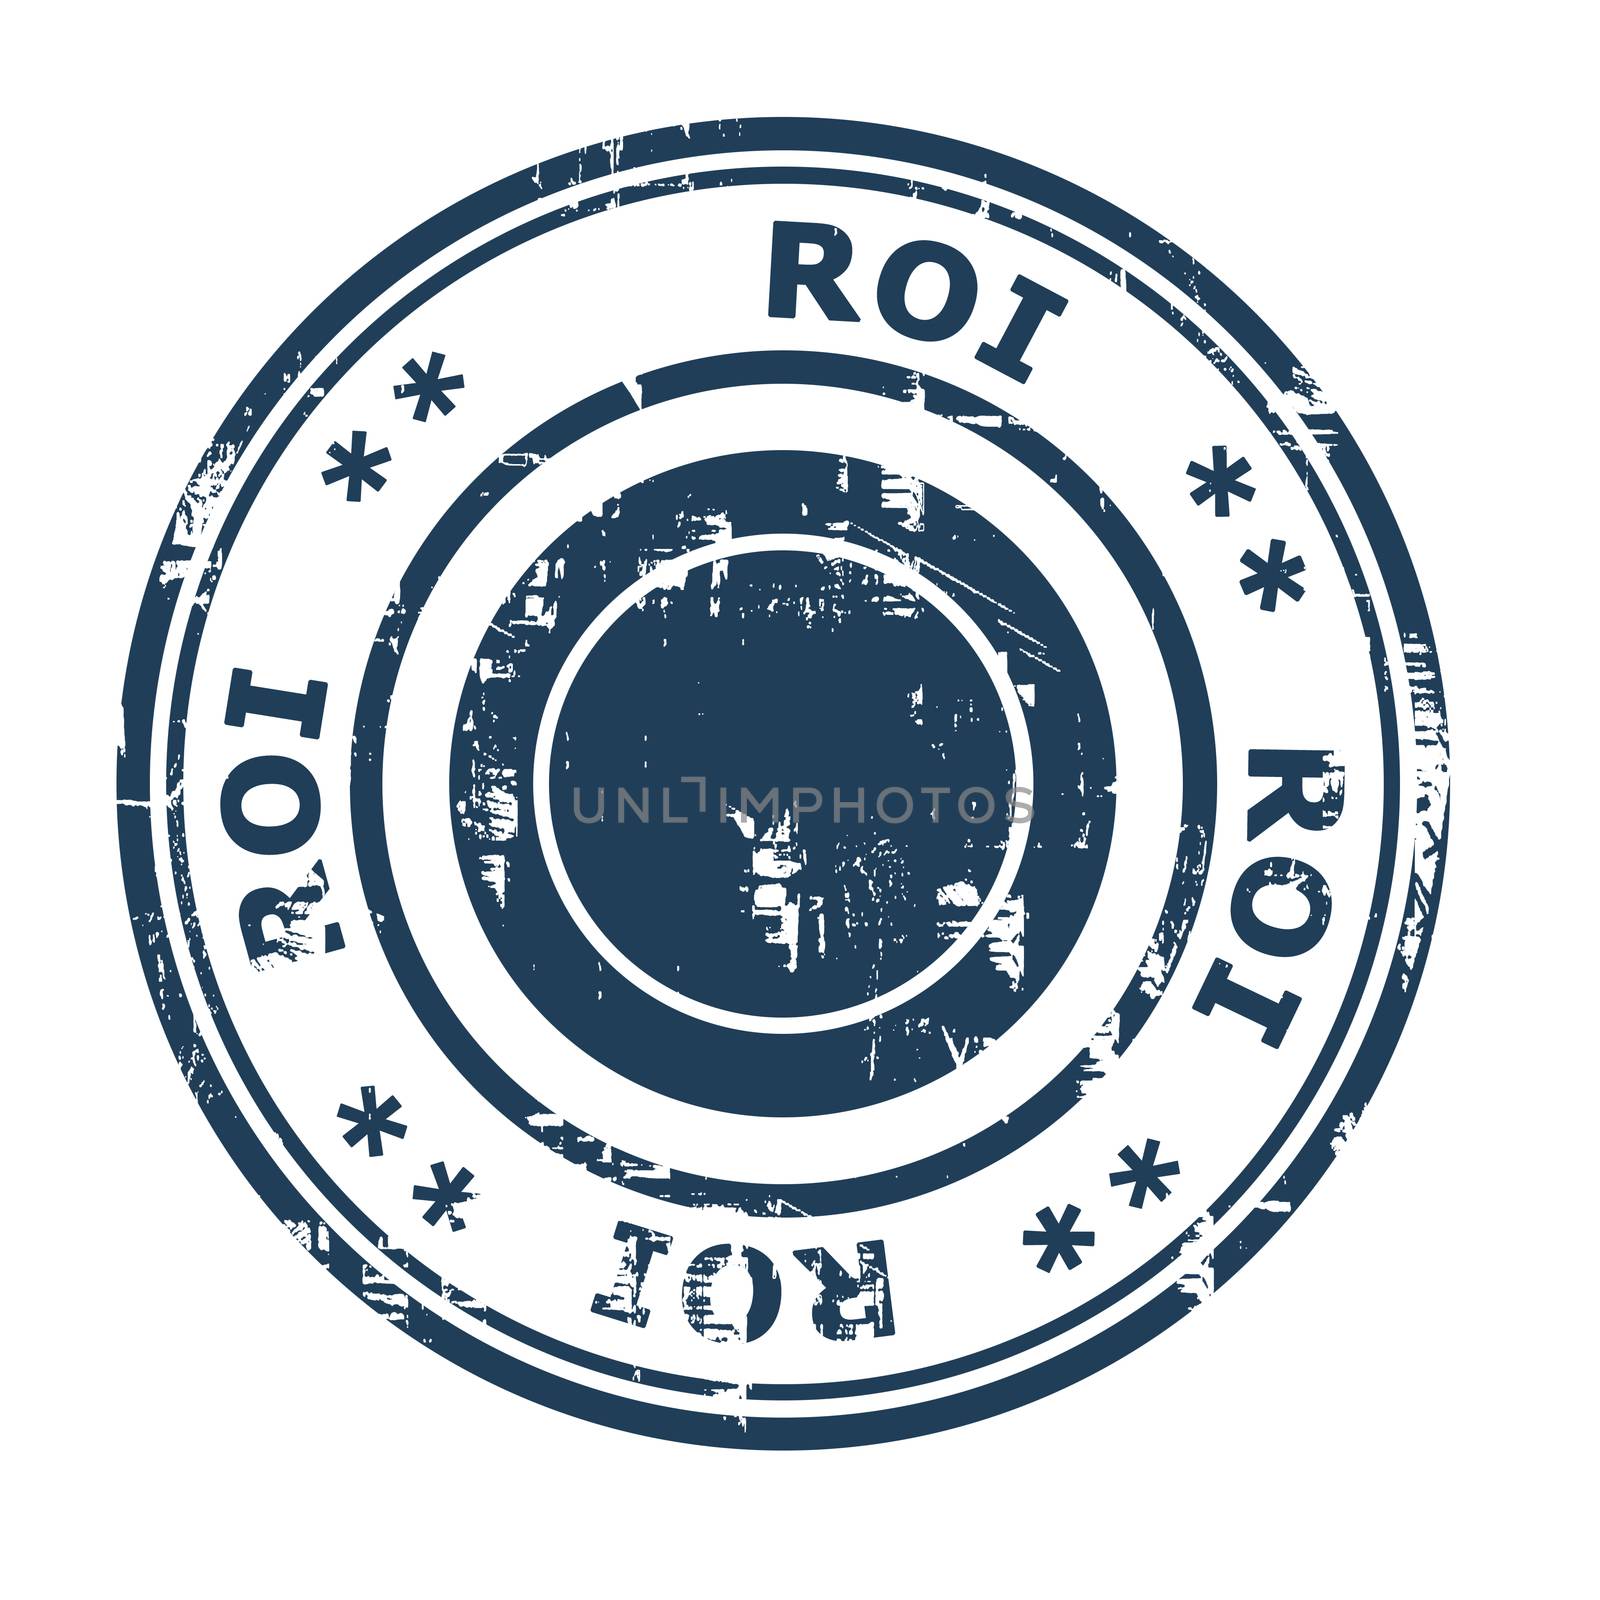 ROI business concept rubber stamp by speedfighter